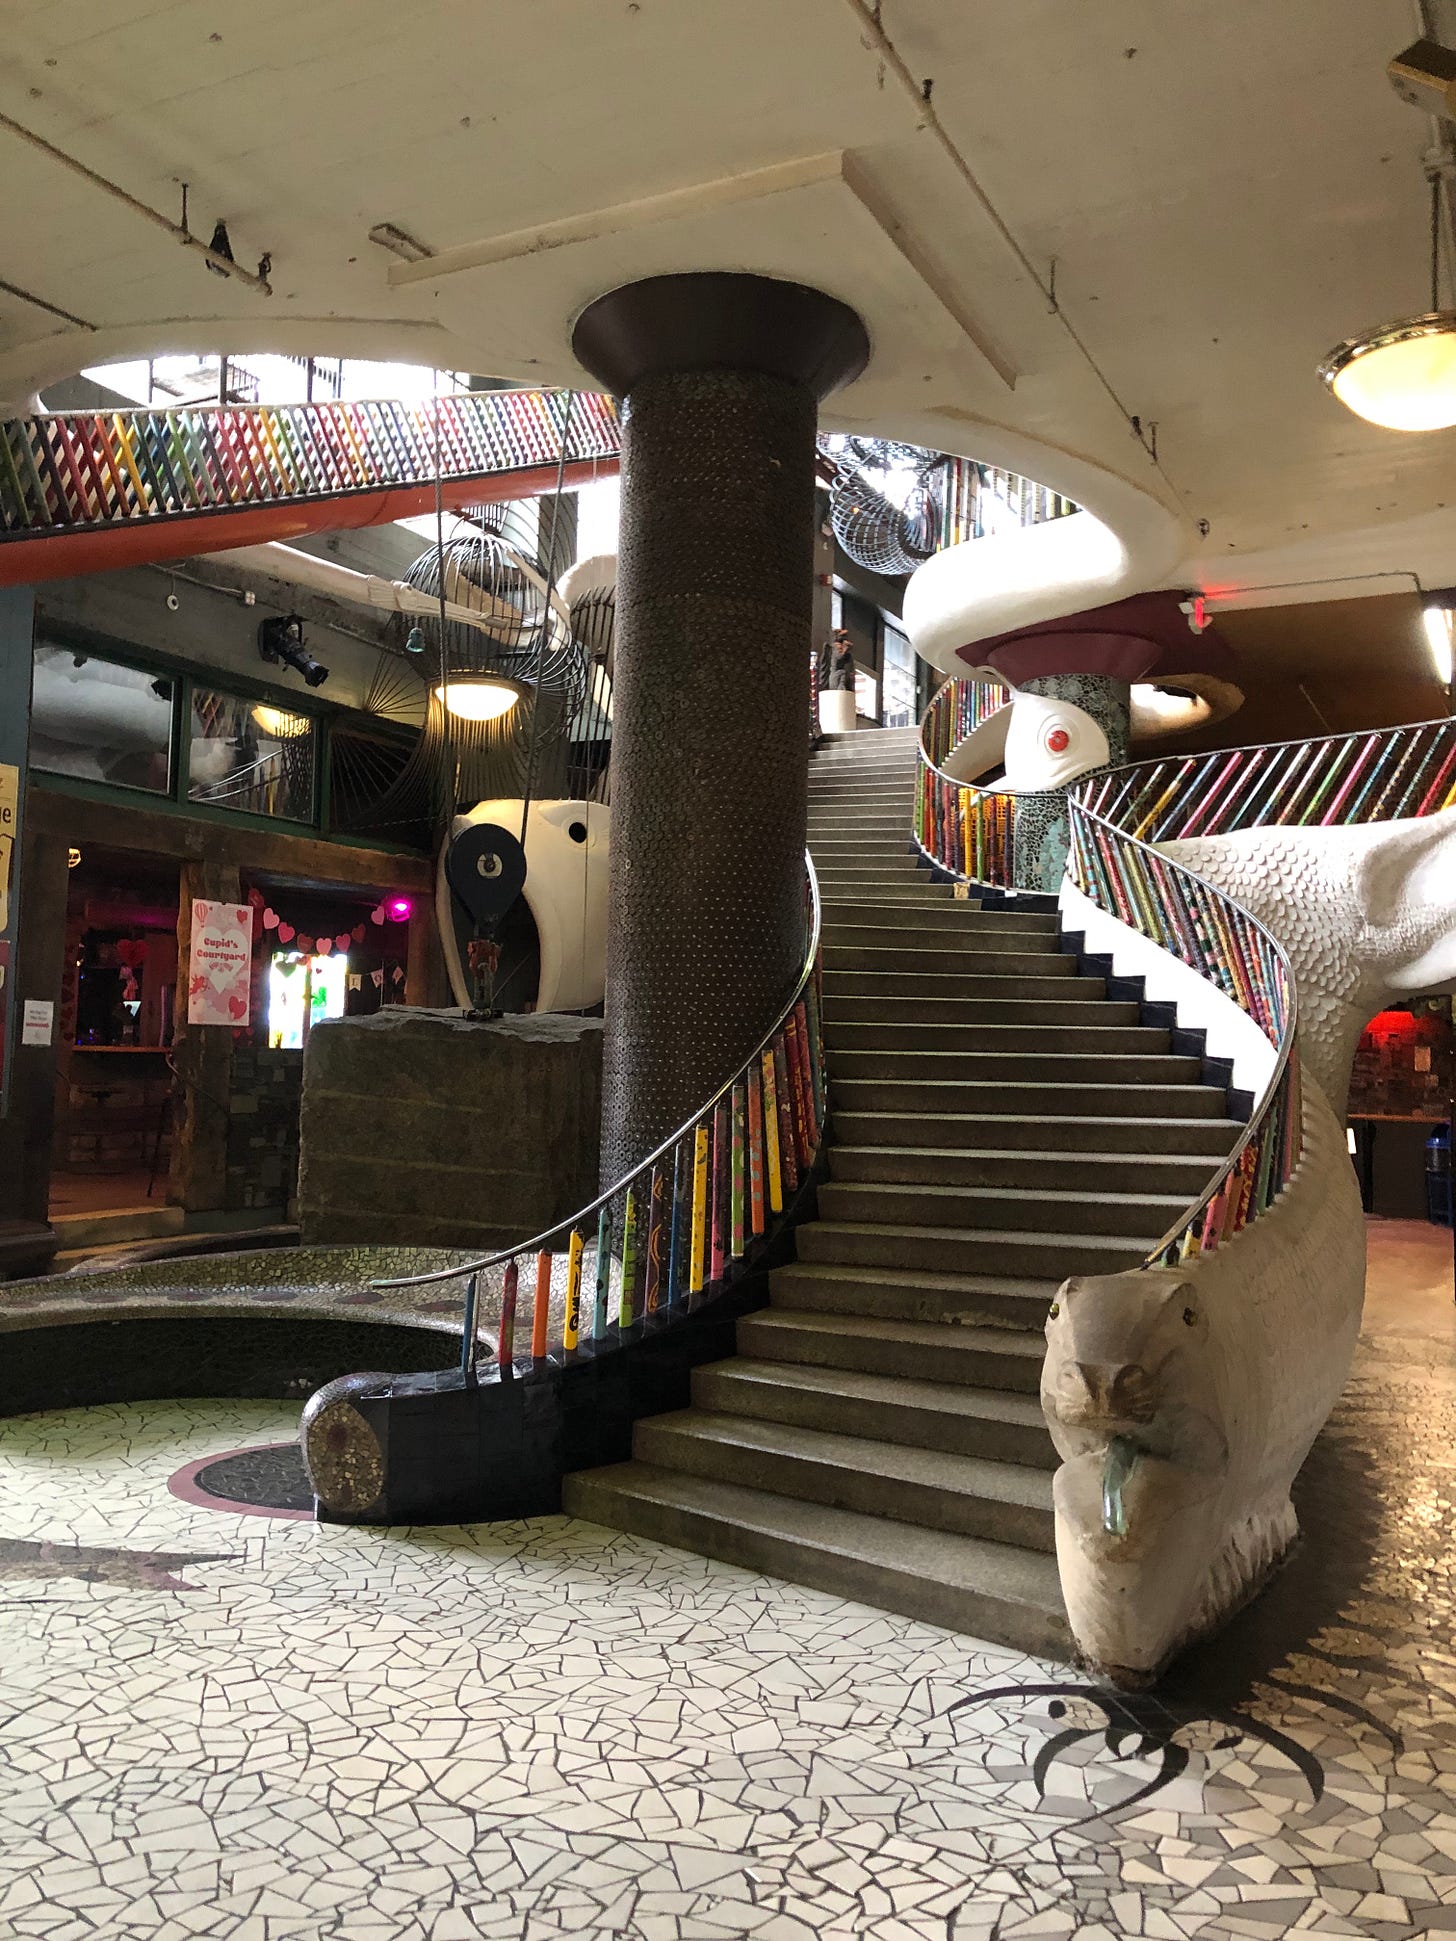 A grand and colorful staircase